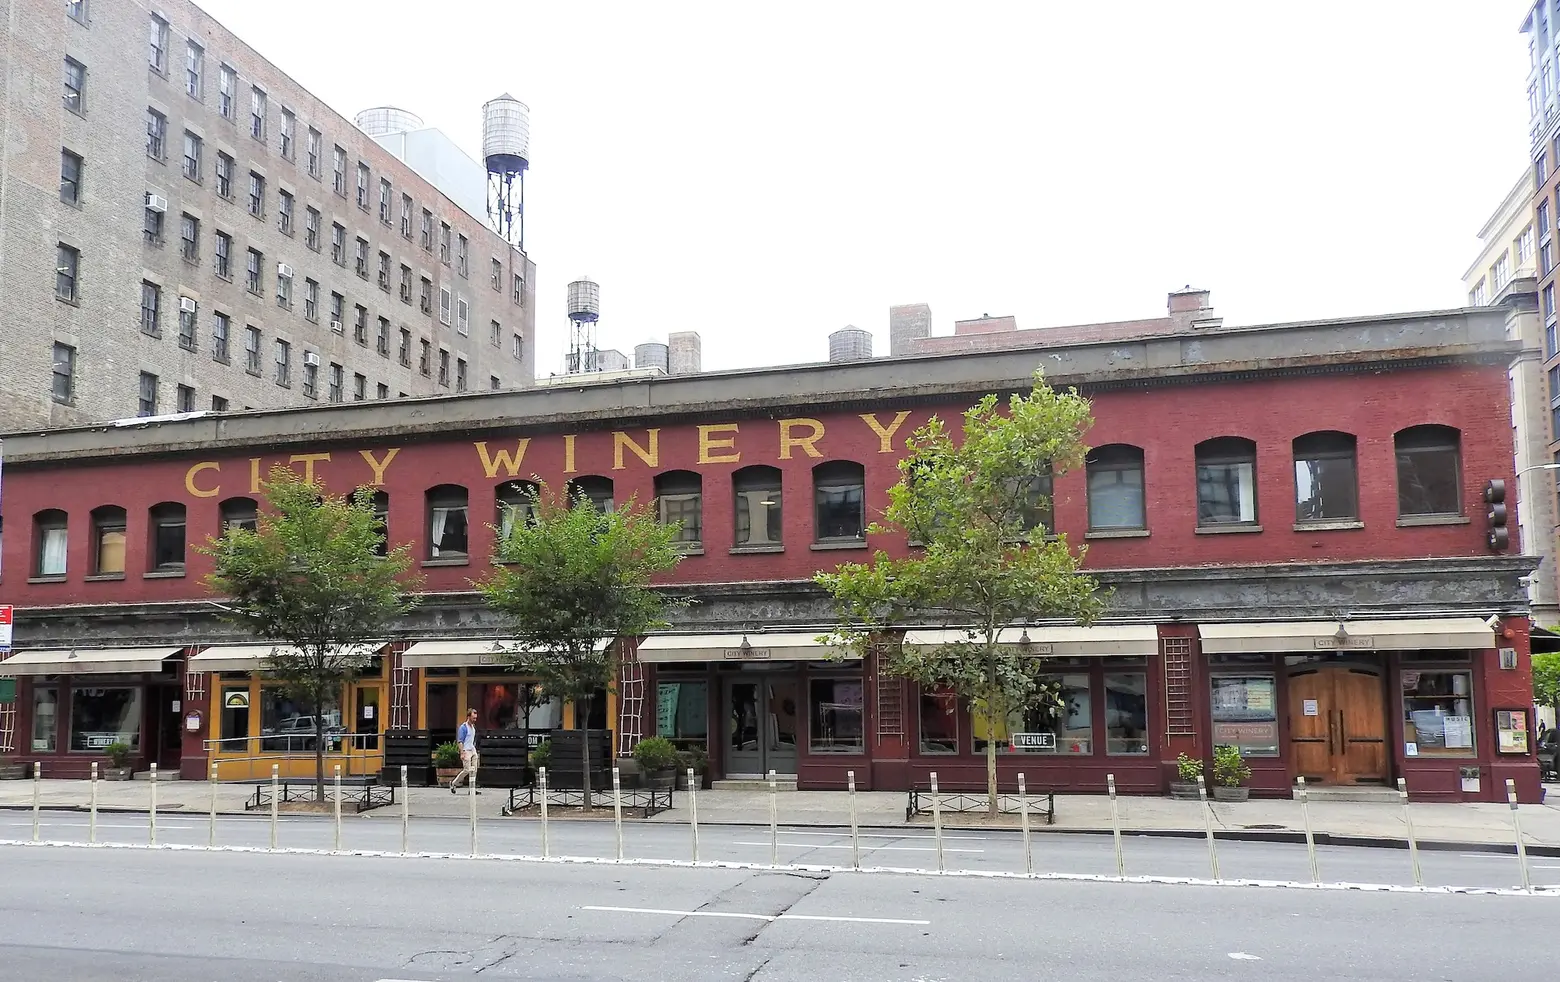 City Winery is moving to Google’s Pier 57